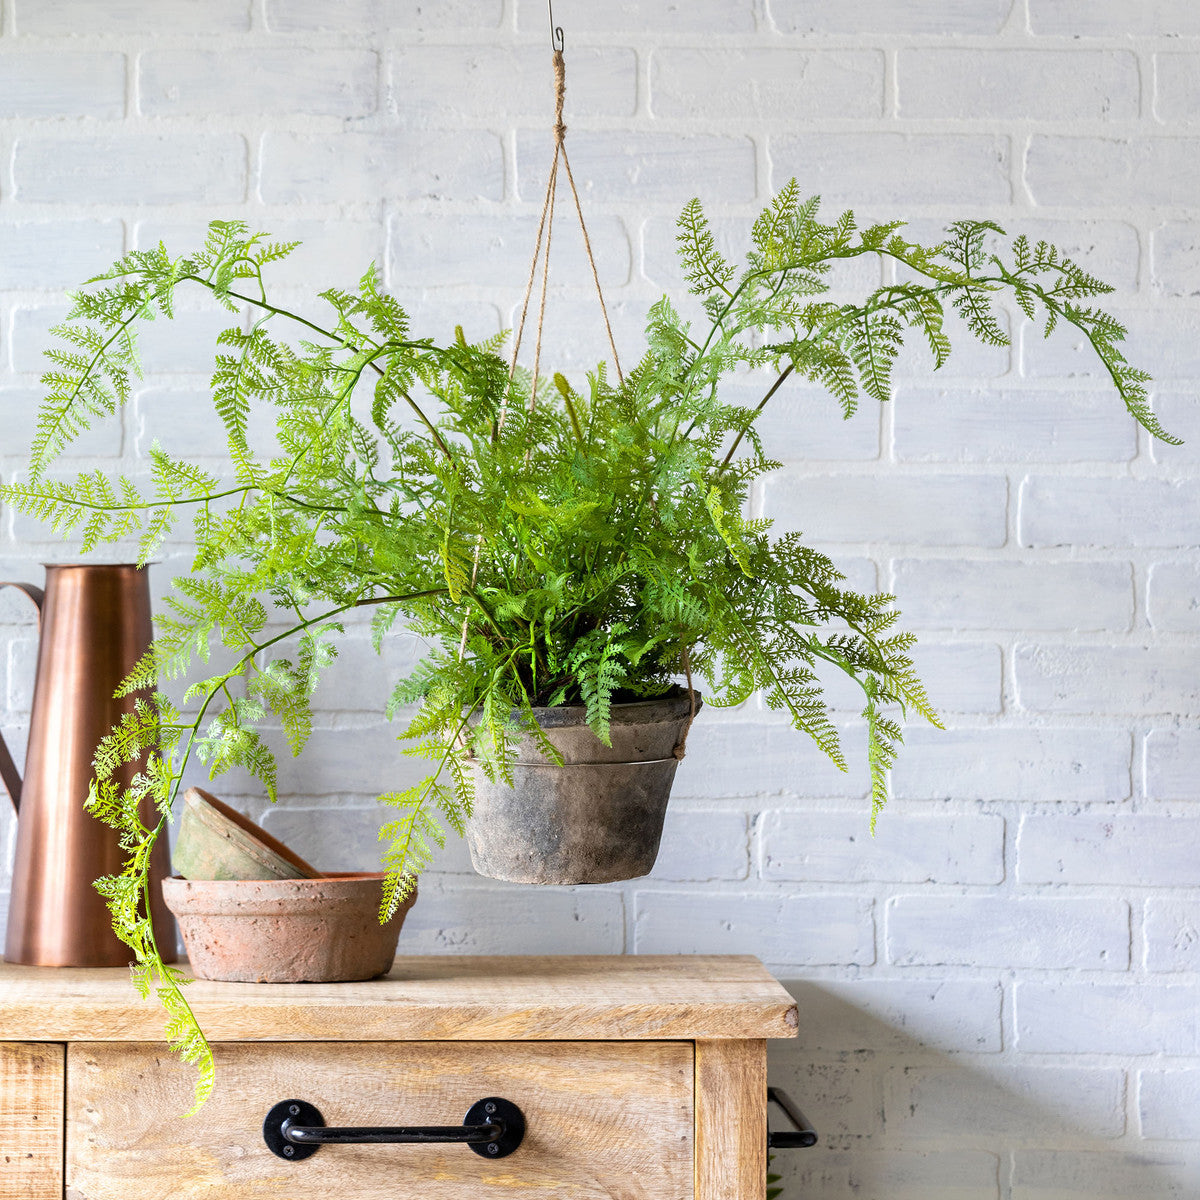 Potted Hanging Fern - Large